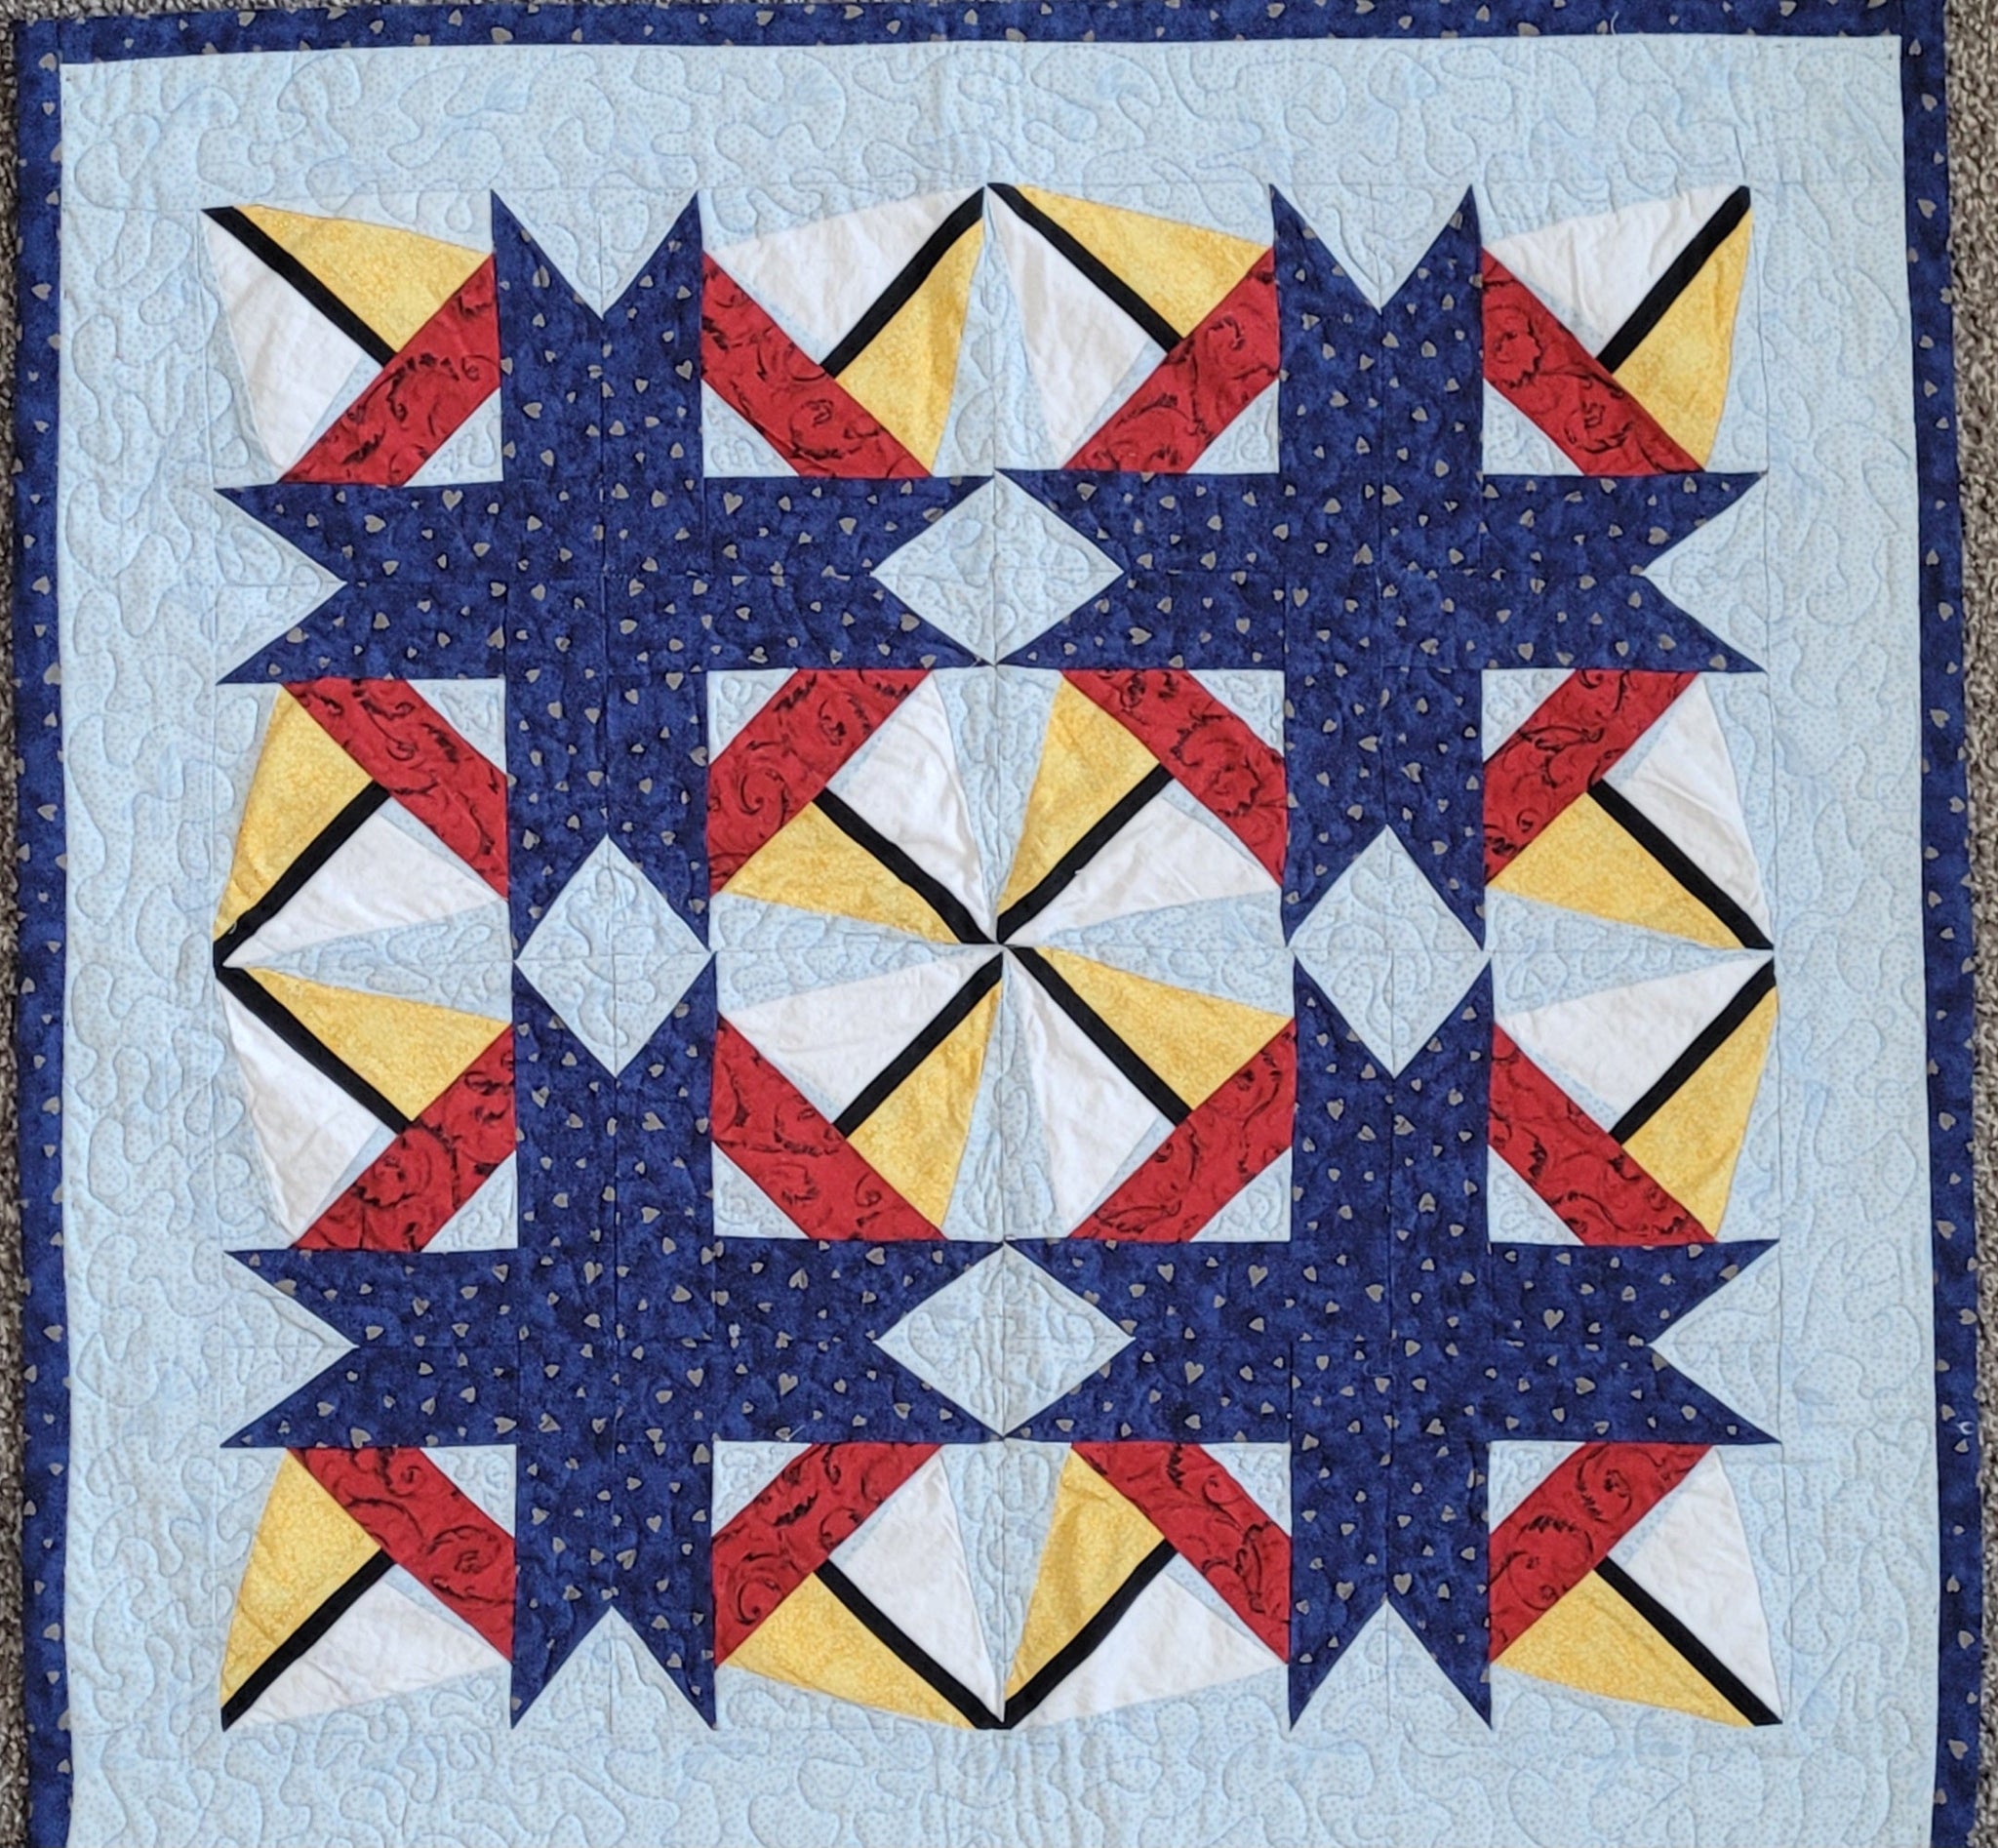 Bright little sailboats abound on a blue background in this quilt done with the paper pieced quilting technique.